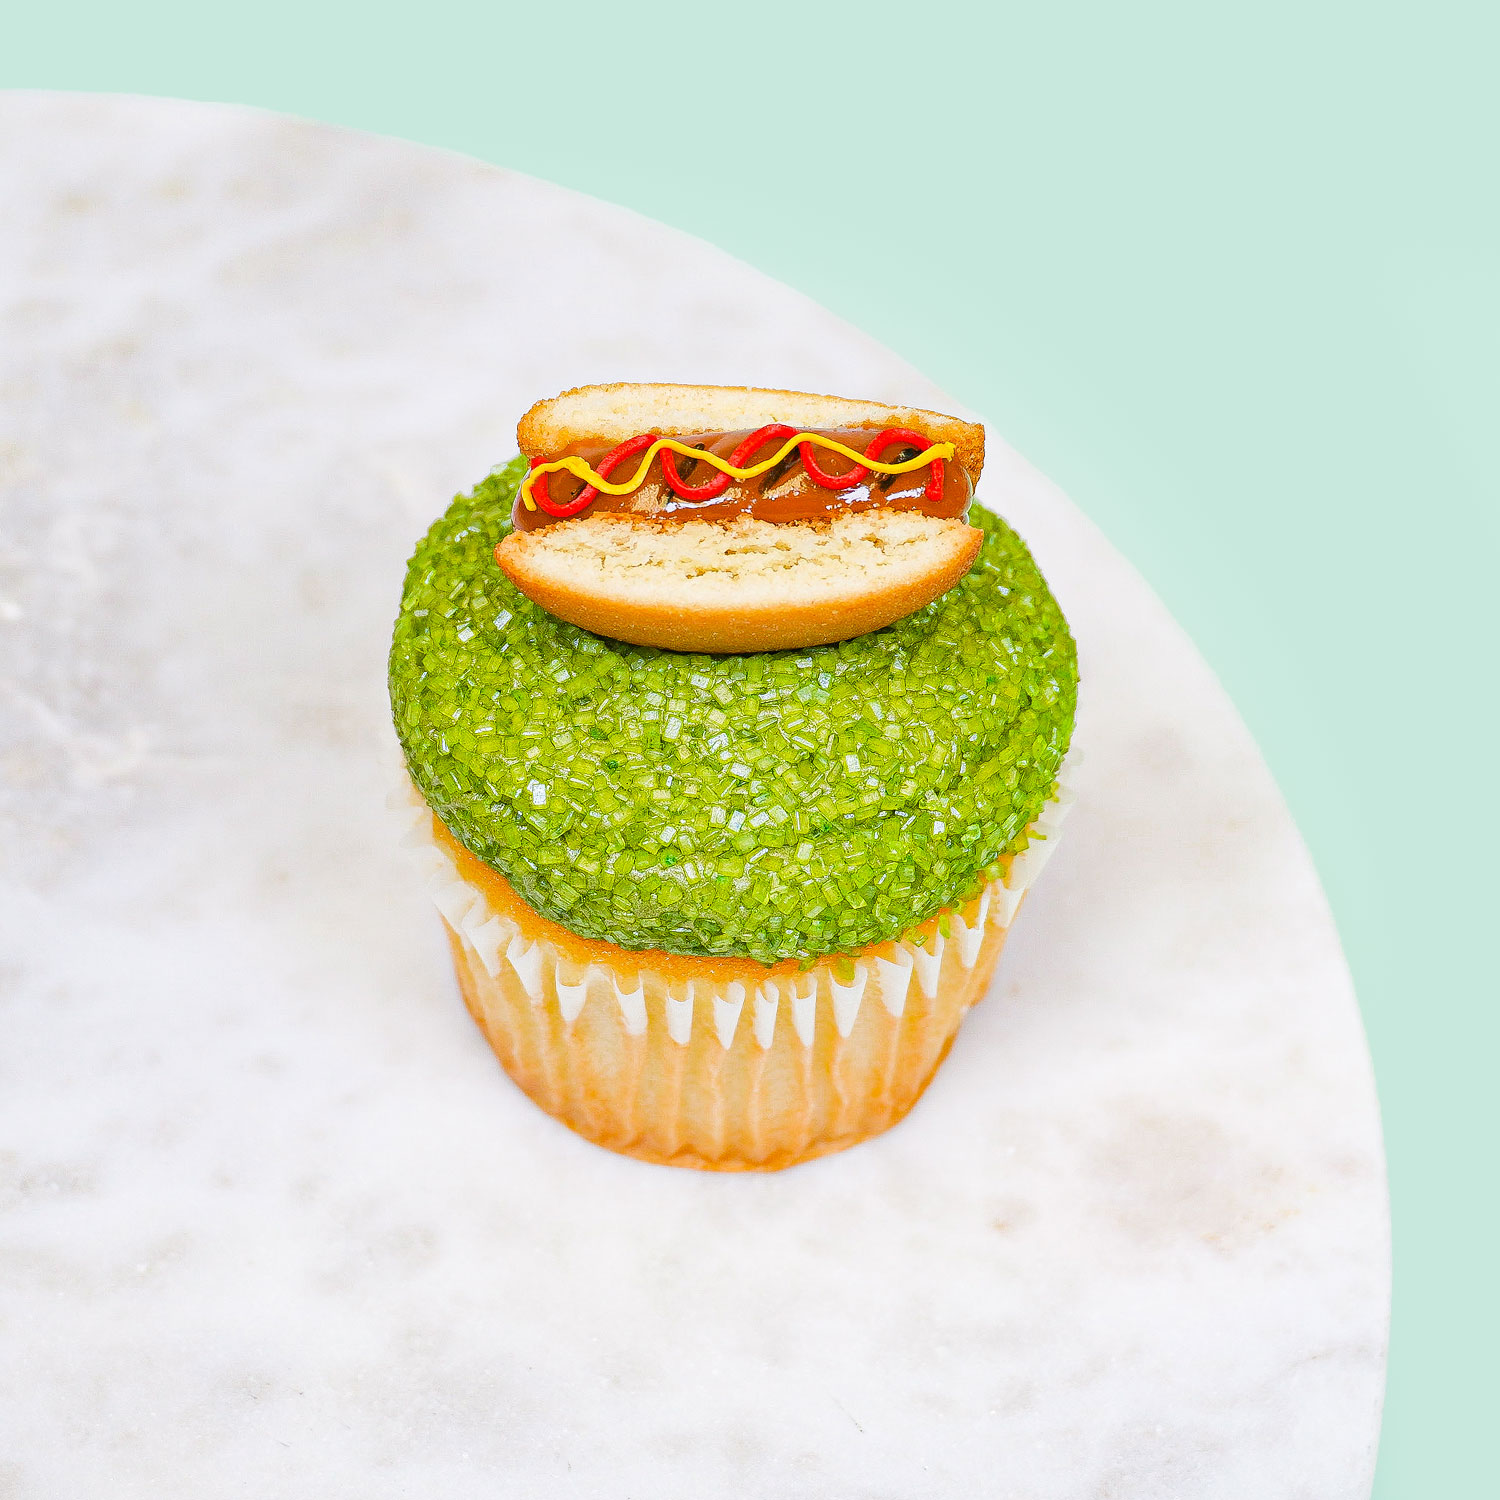 cupcake decorated to look like a hot dog sitting on grass